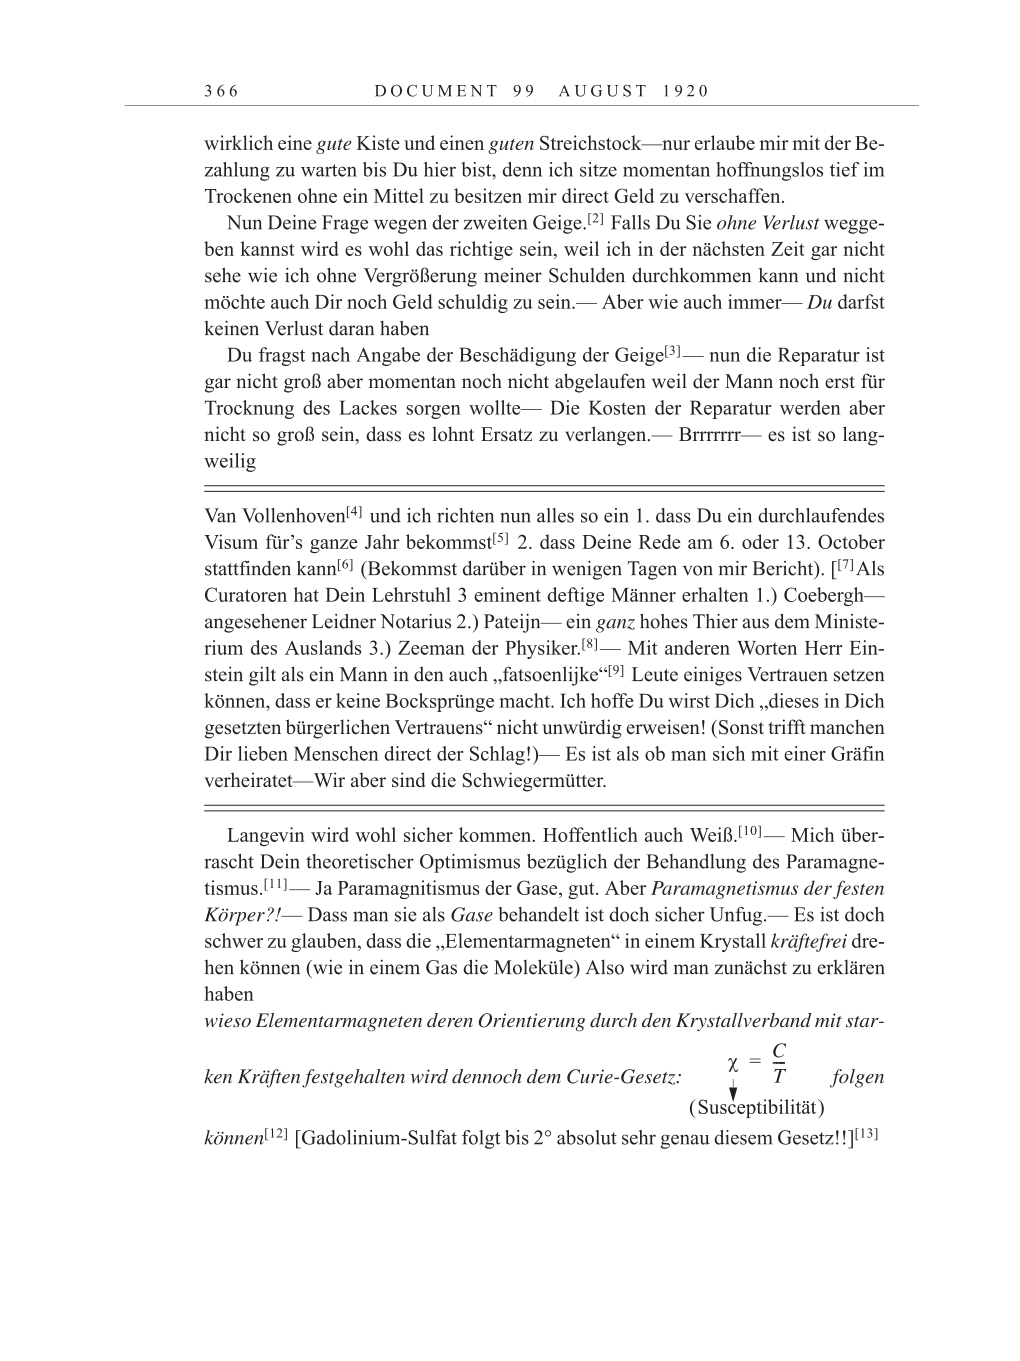 Volume 10: The Berlin Years: Correspondence May-December 1920 / Supplementary Correspondence 1909-1920 page 366